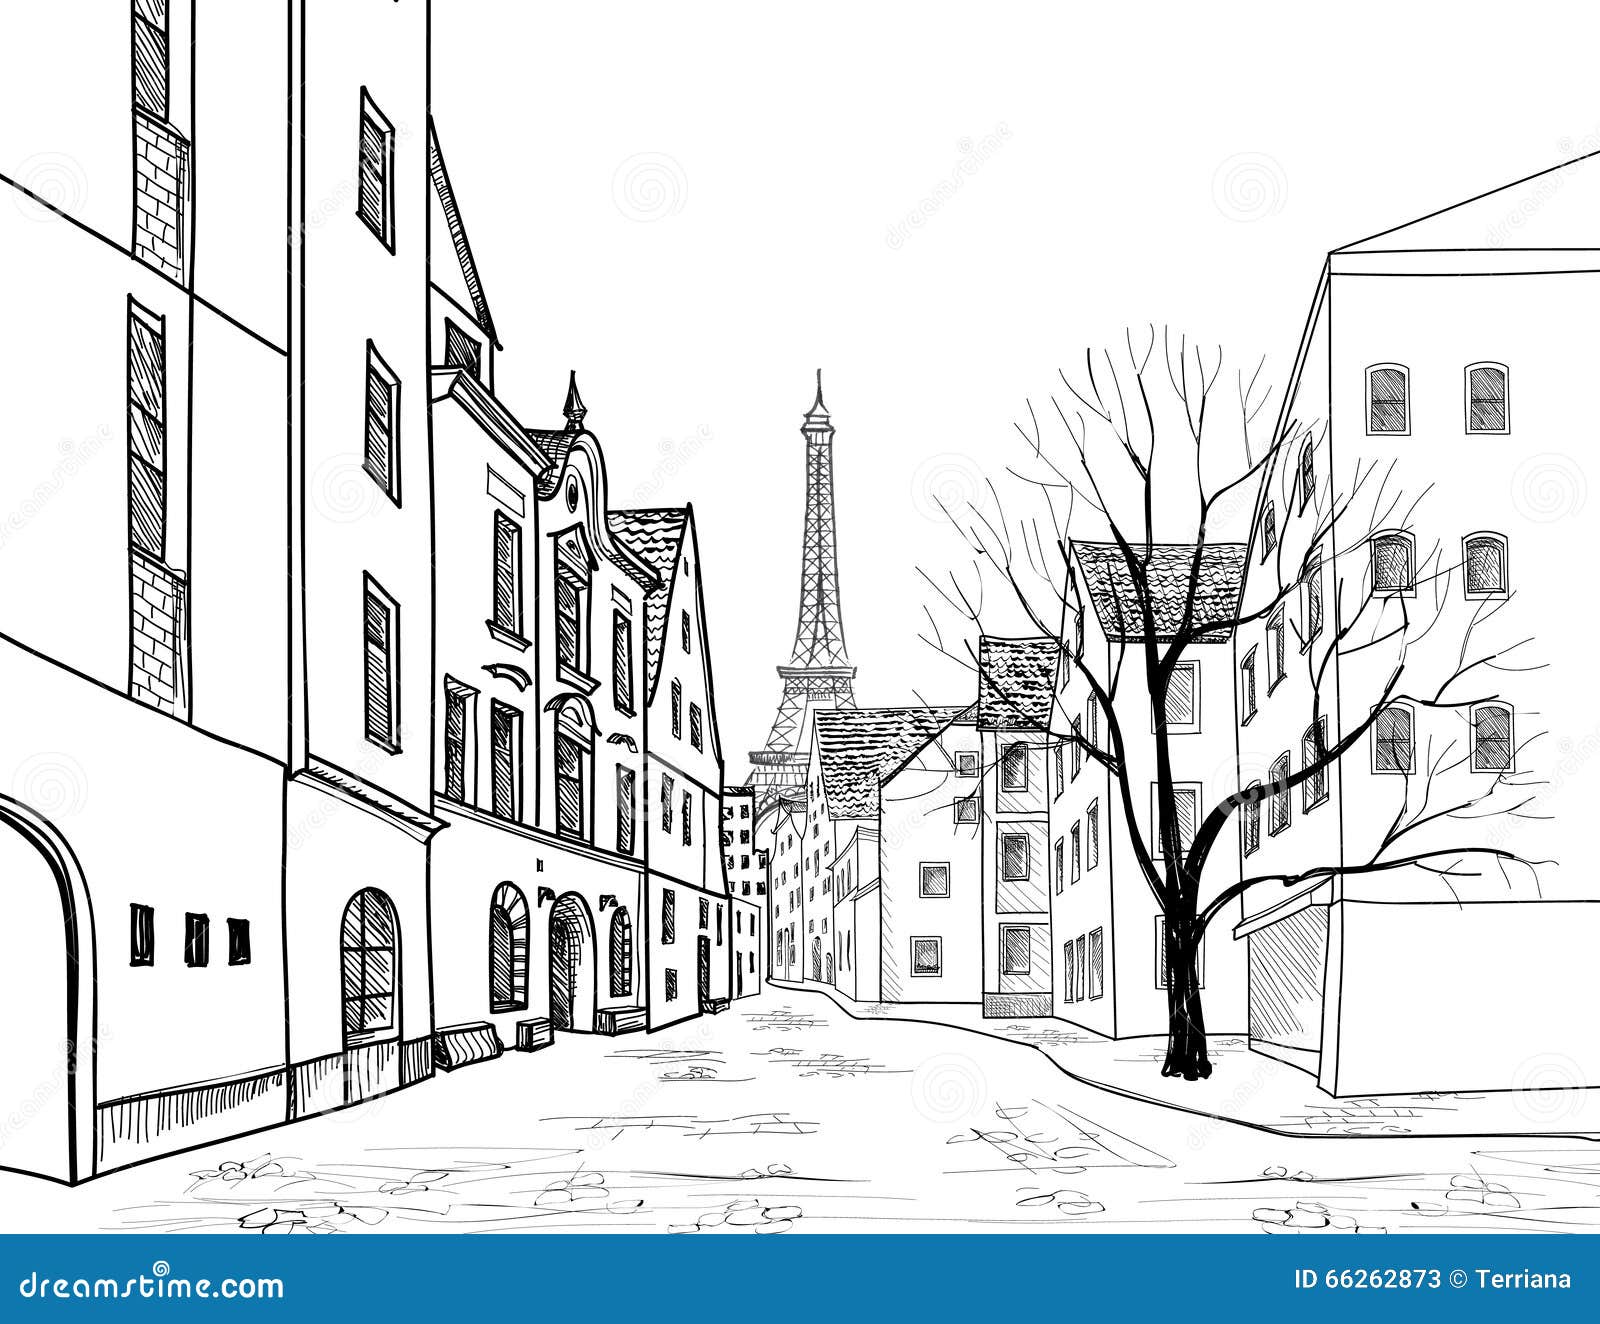 paris street. cityscape - houses, buildings and tree on alleyway